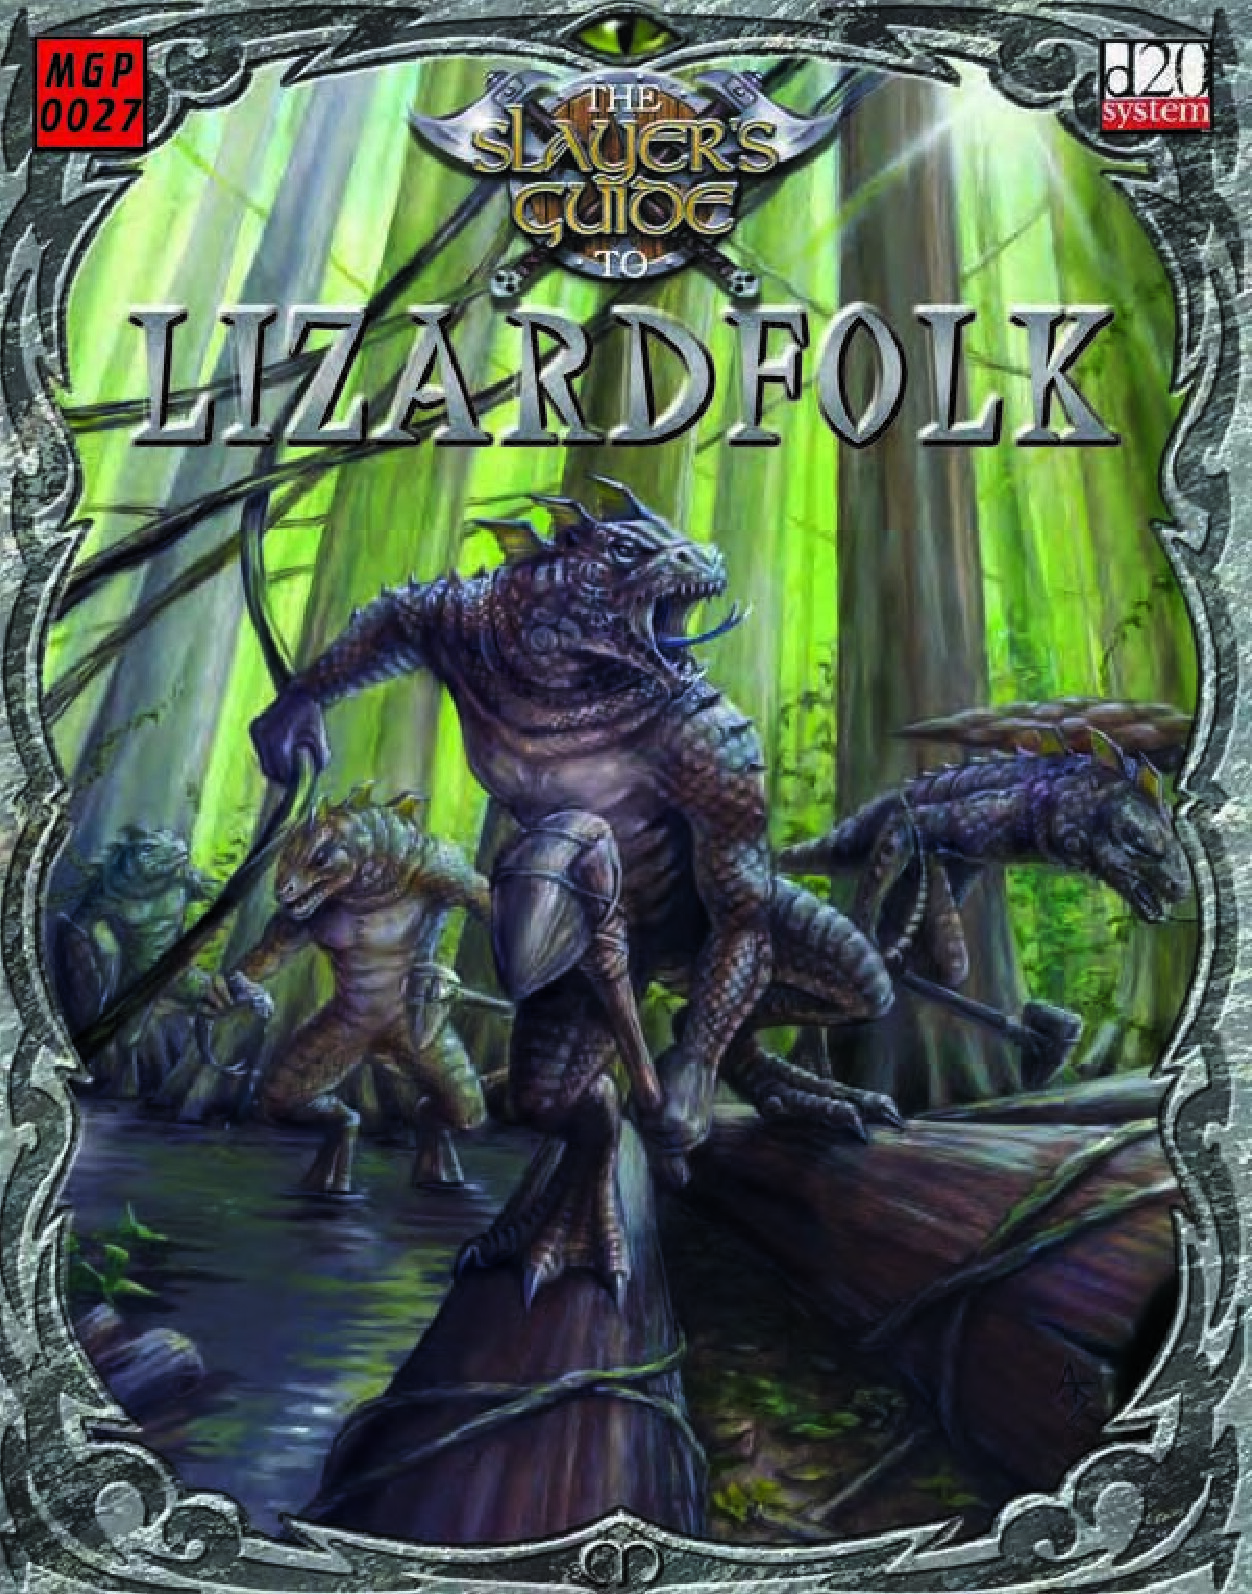 The Slayer's Guide to Lizardfolk